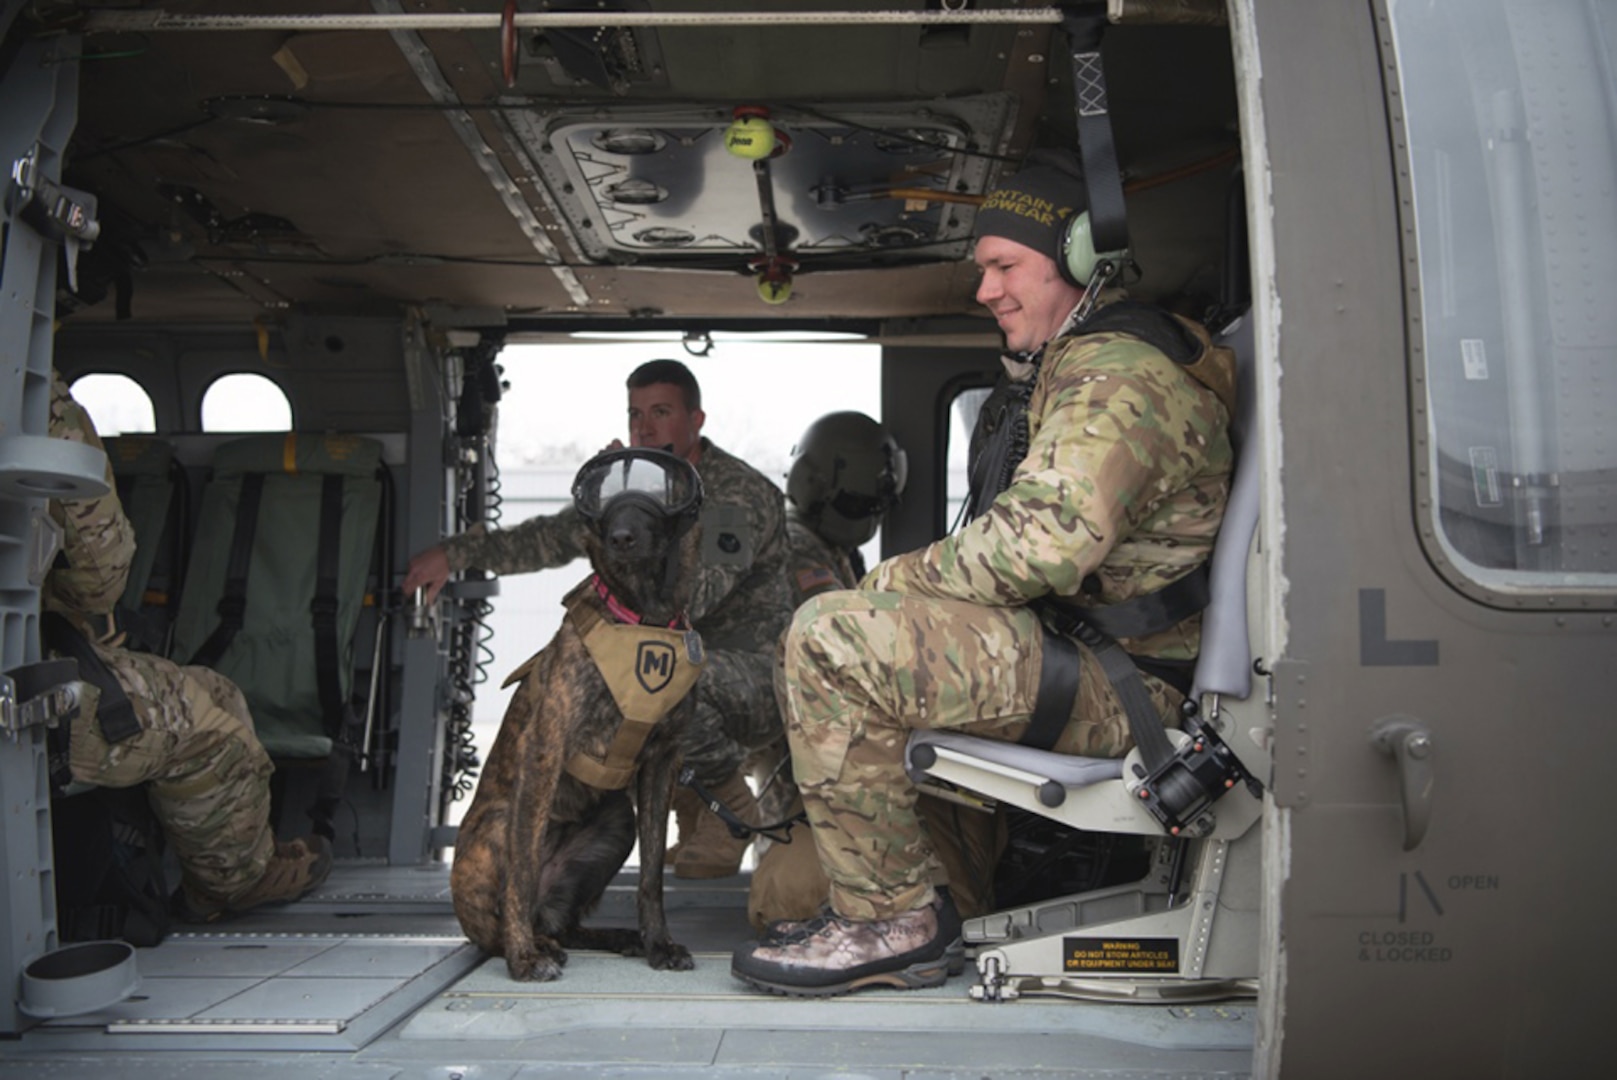 Tech. Sgt. Rudy Parsons, 123rd Special Tactics pararescueman, and his search and rescue dog, Callie, ride a UH-60 Black Hawk aircraft as part of Callie’s familiarization training at the Boone National Guard Center, Frankfort, Ky., Nov. 29, 2018.